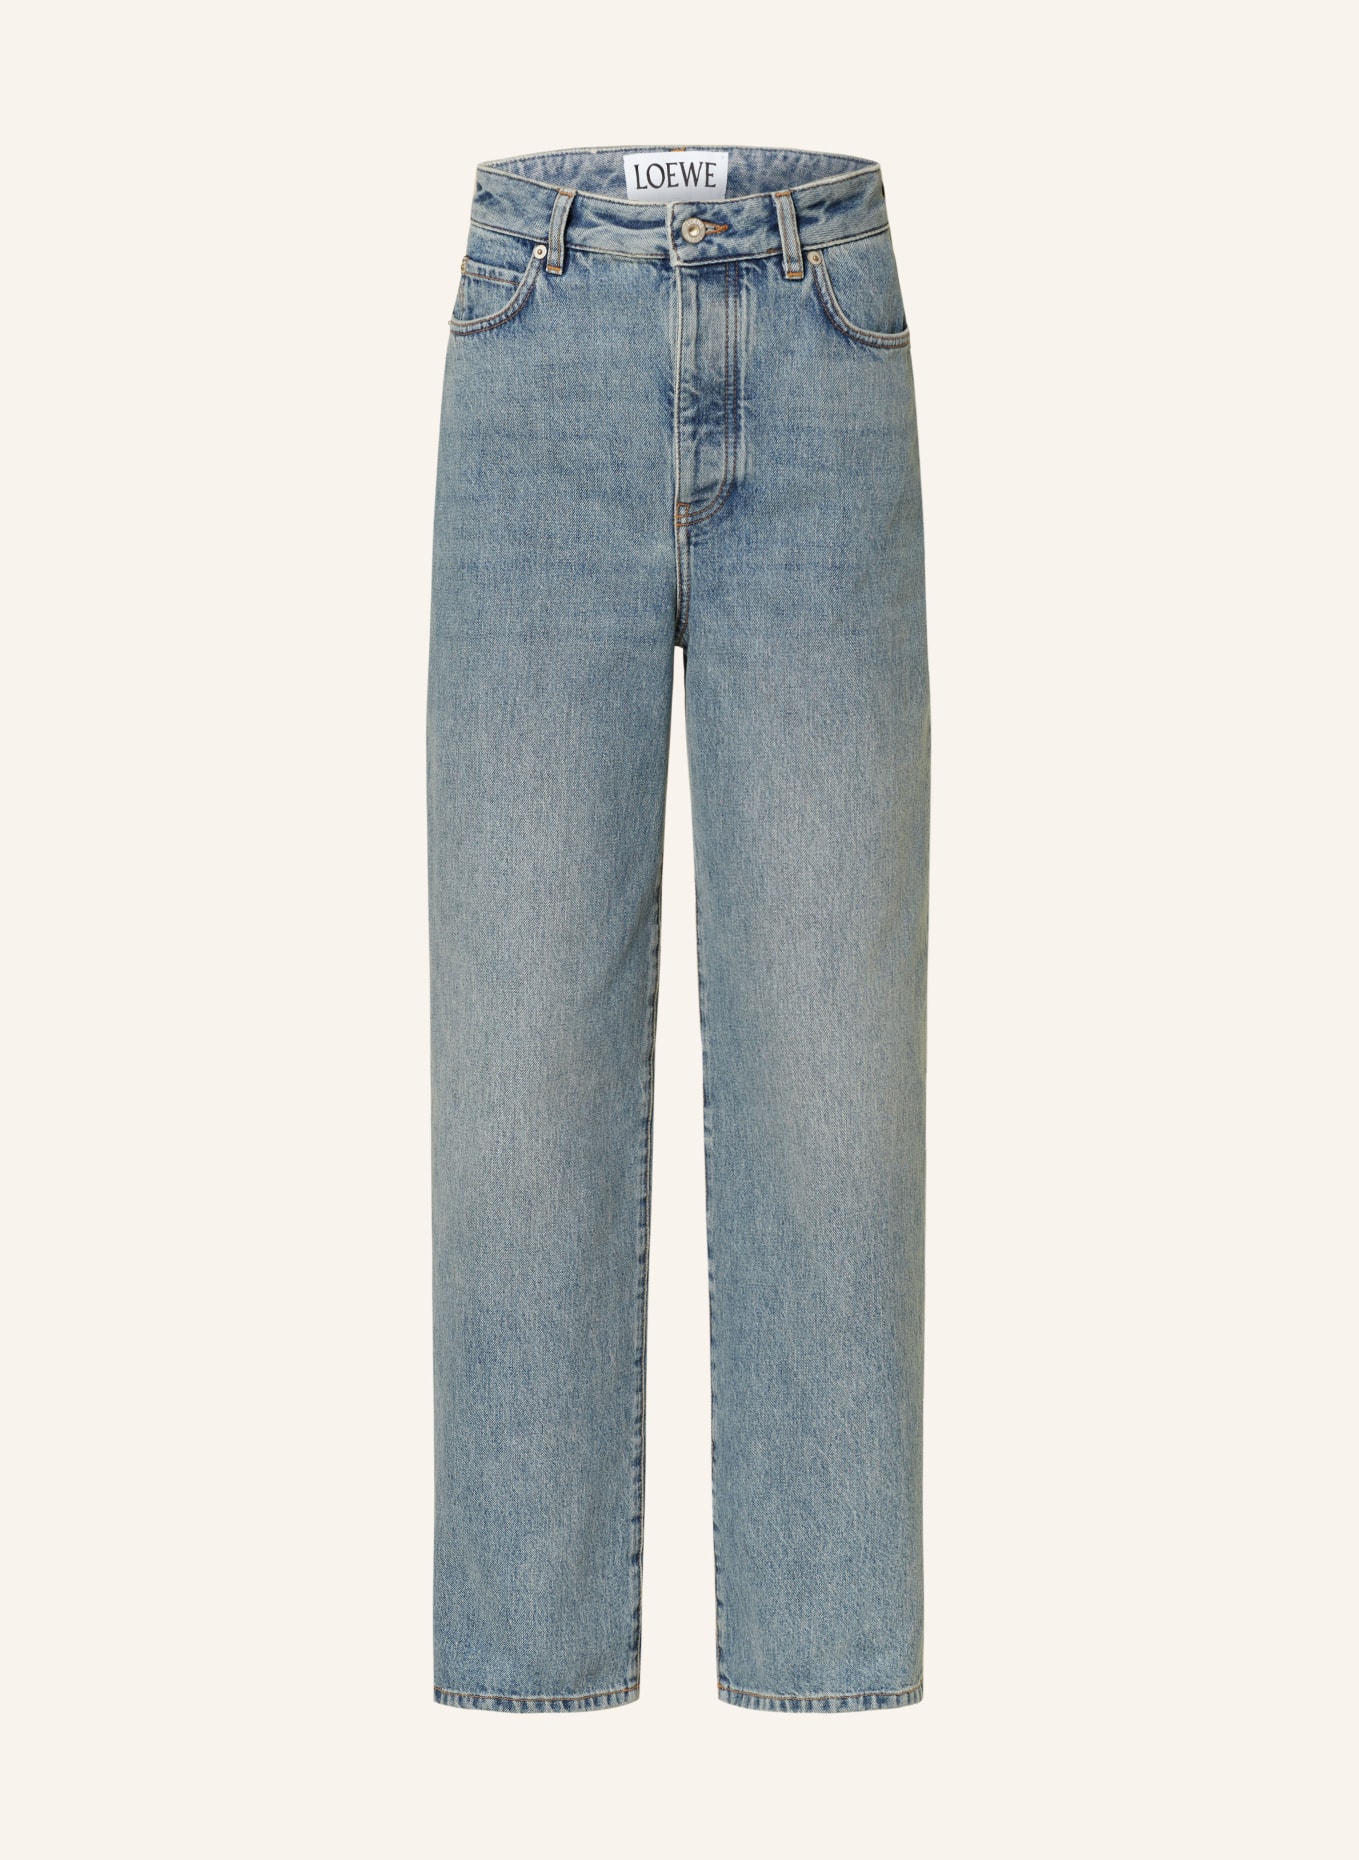 LOEWE Straight Jeans, Farbe: 8438 WASHED BLUE (Bild 1)